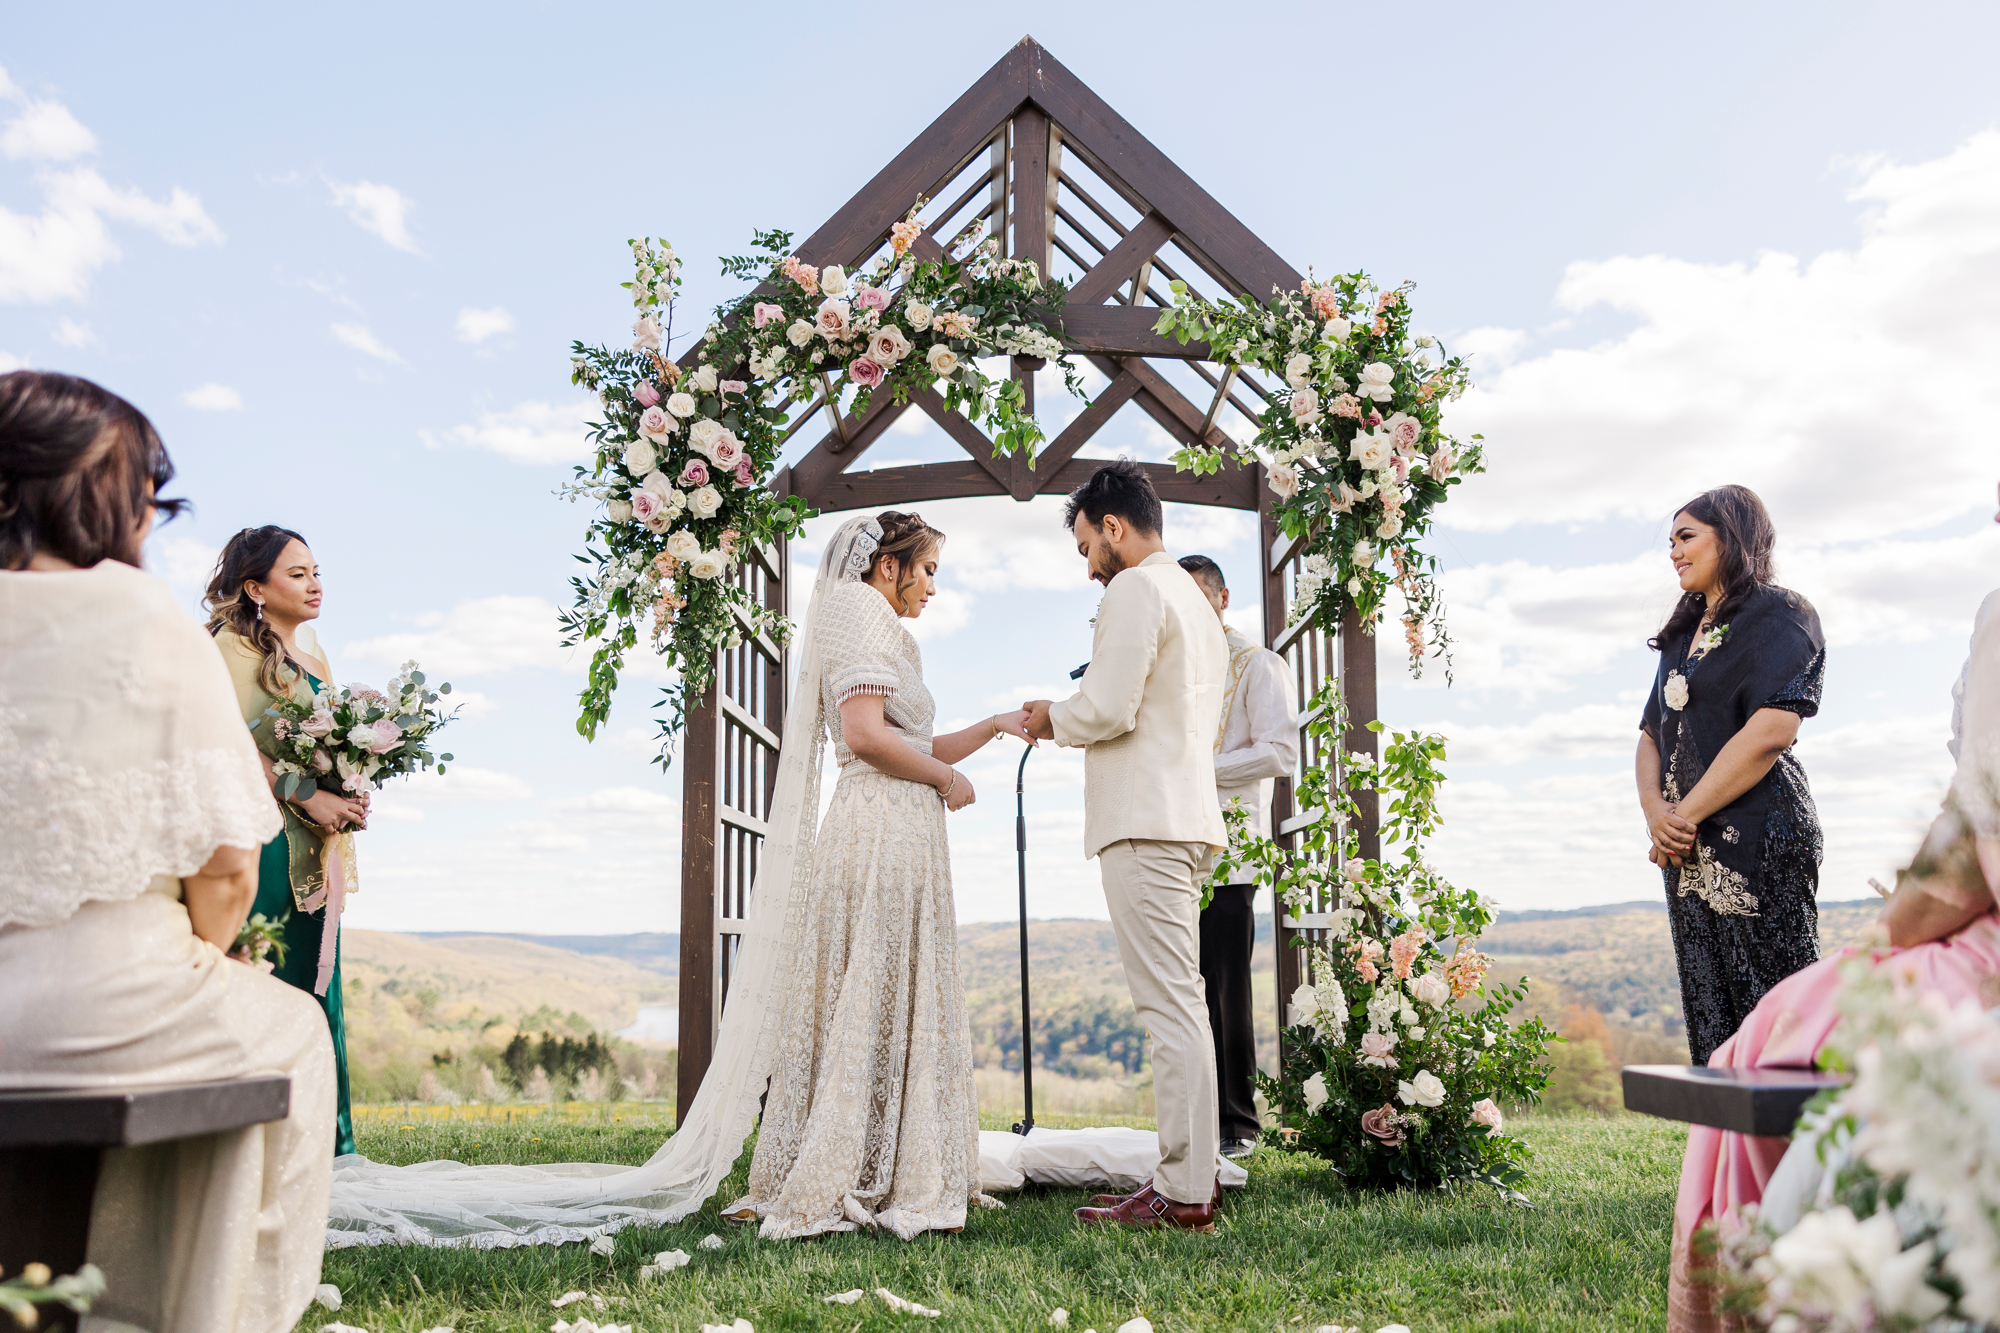 Breathtaking Seminary Hill Wedding in the Summertime